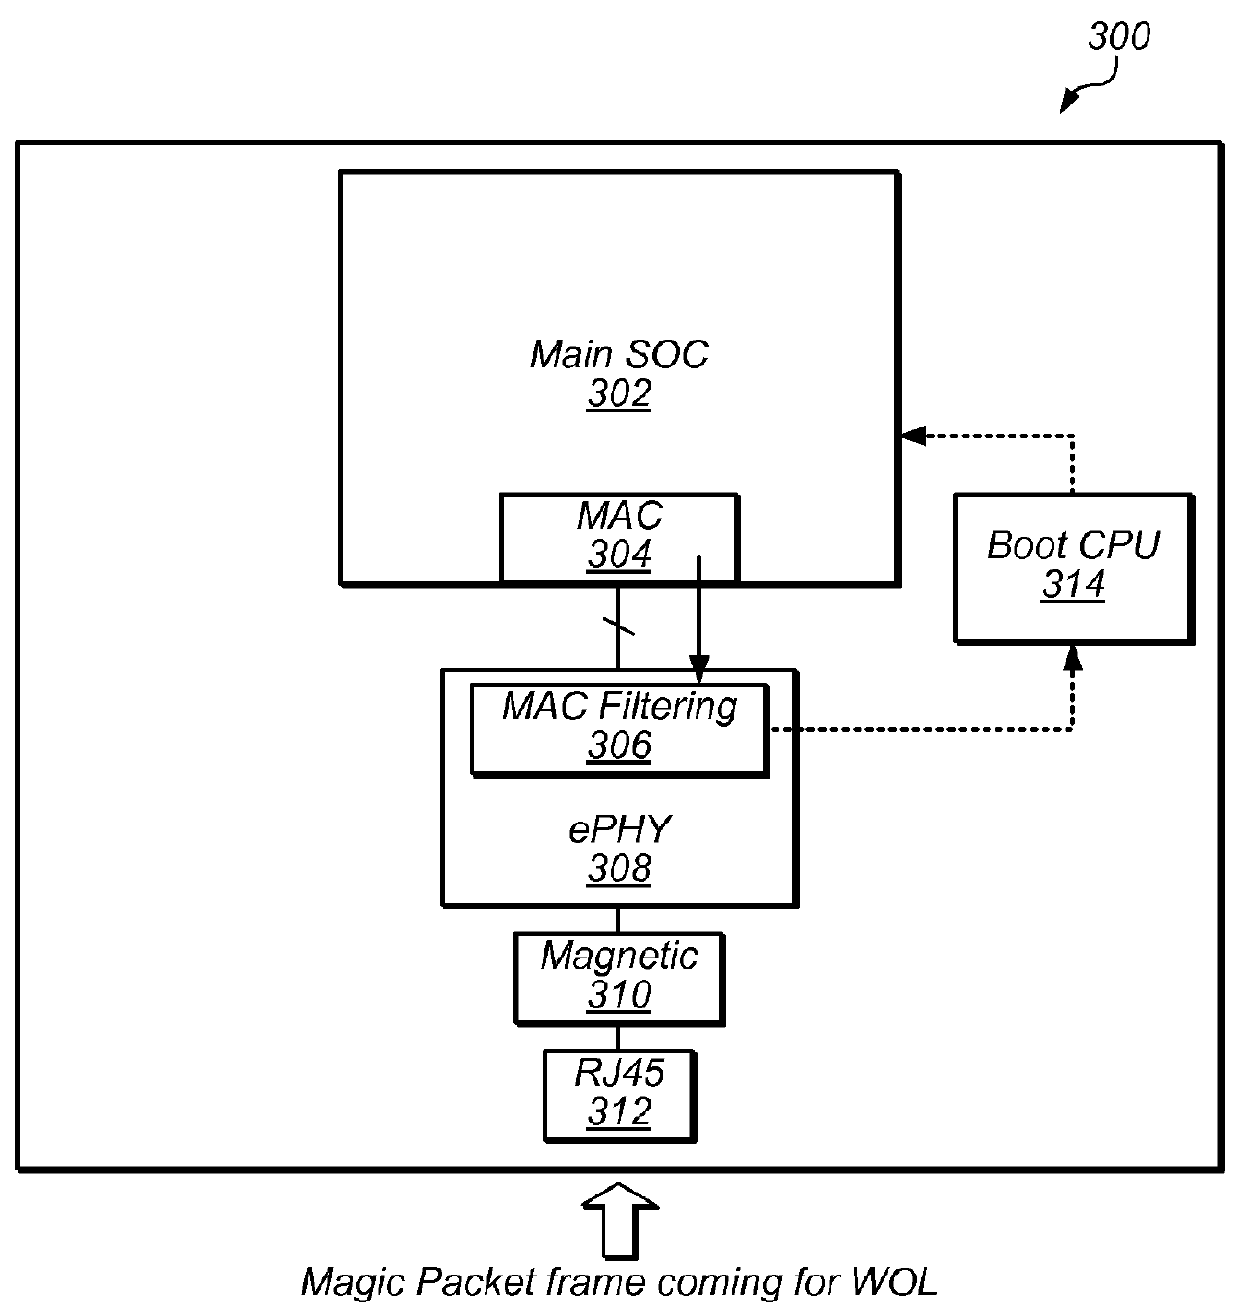 MAC Filtering on Ethernet PHY for Wake-On-LAN